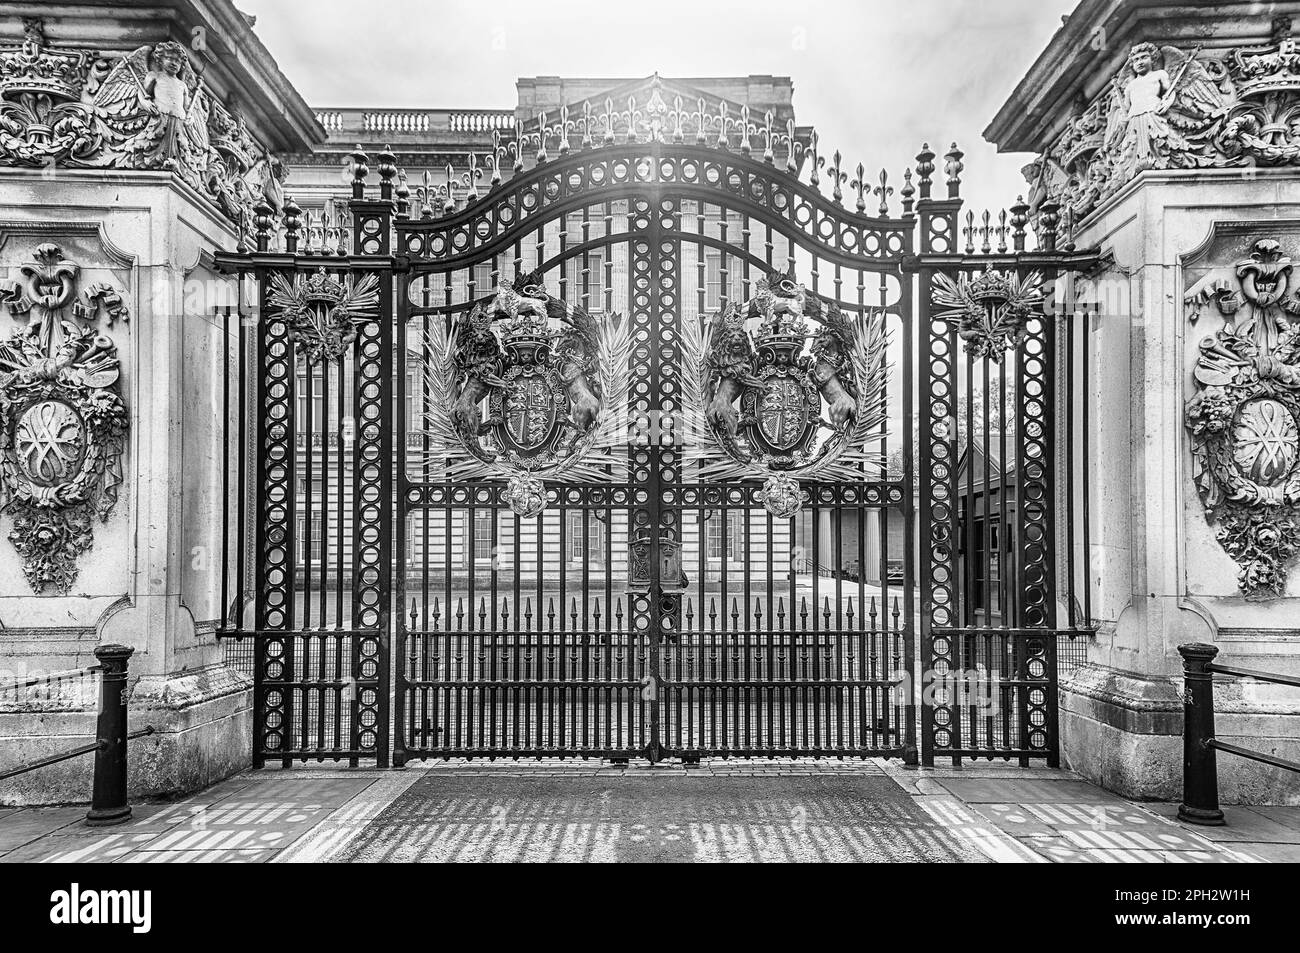 Gate with gilded ornaments in Buckingham Palace, one of the main tourist attractions in London, England, UK Stock Photo